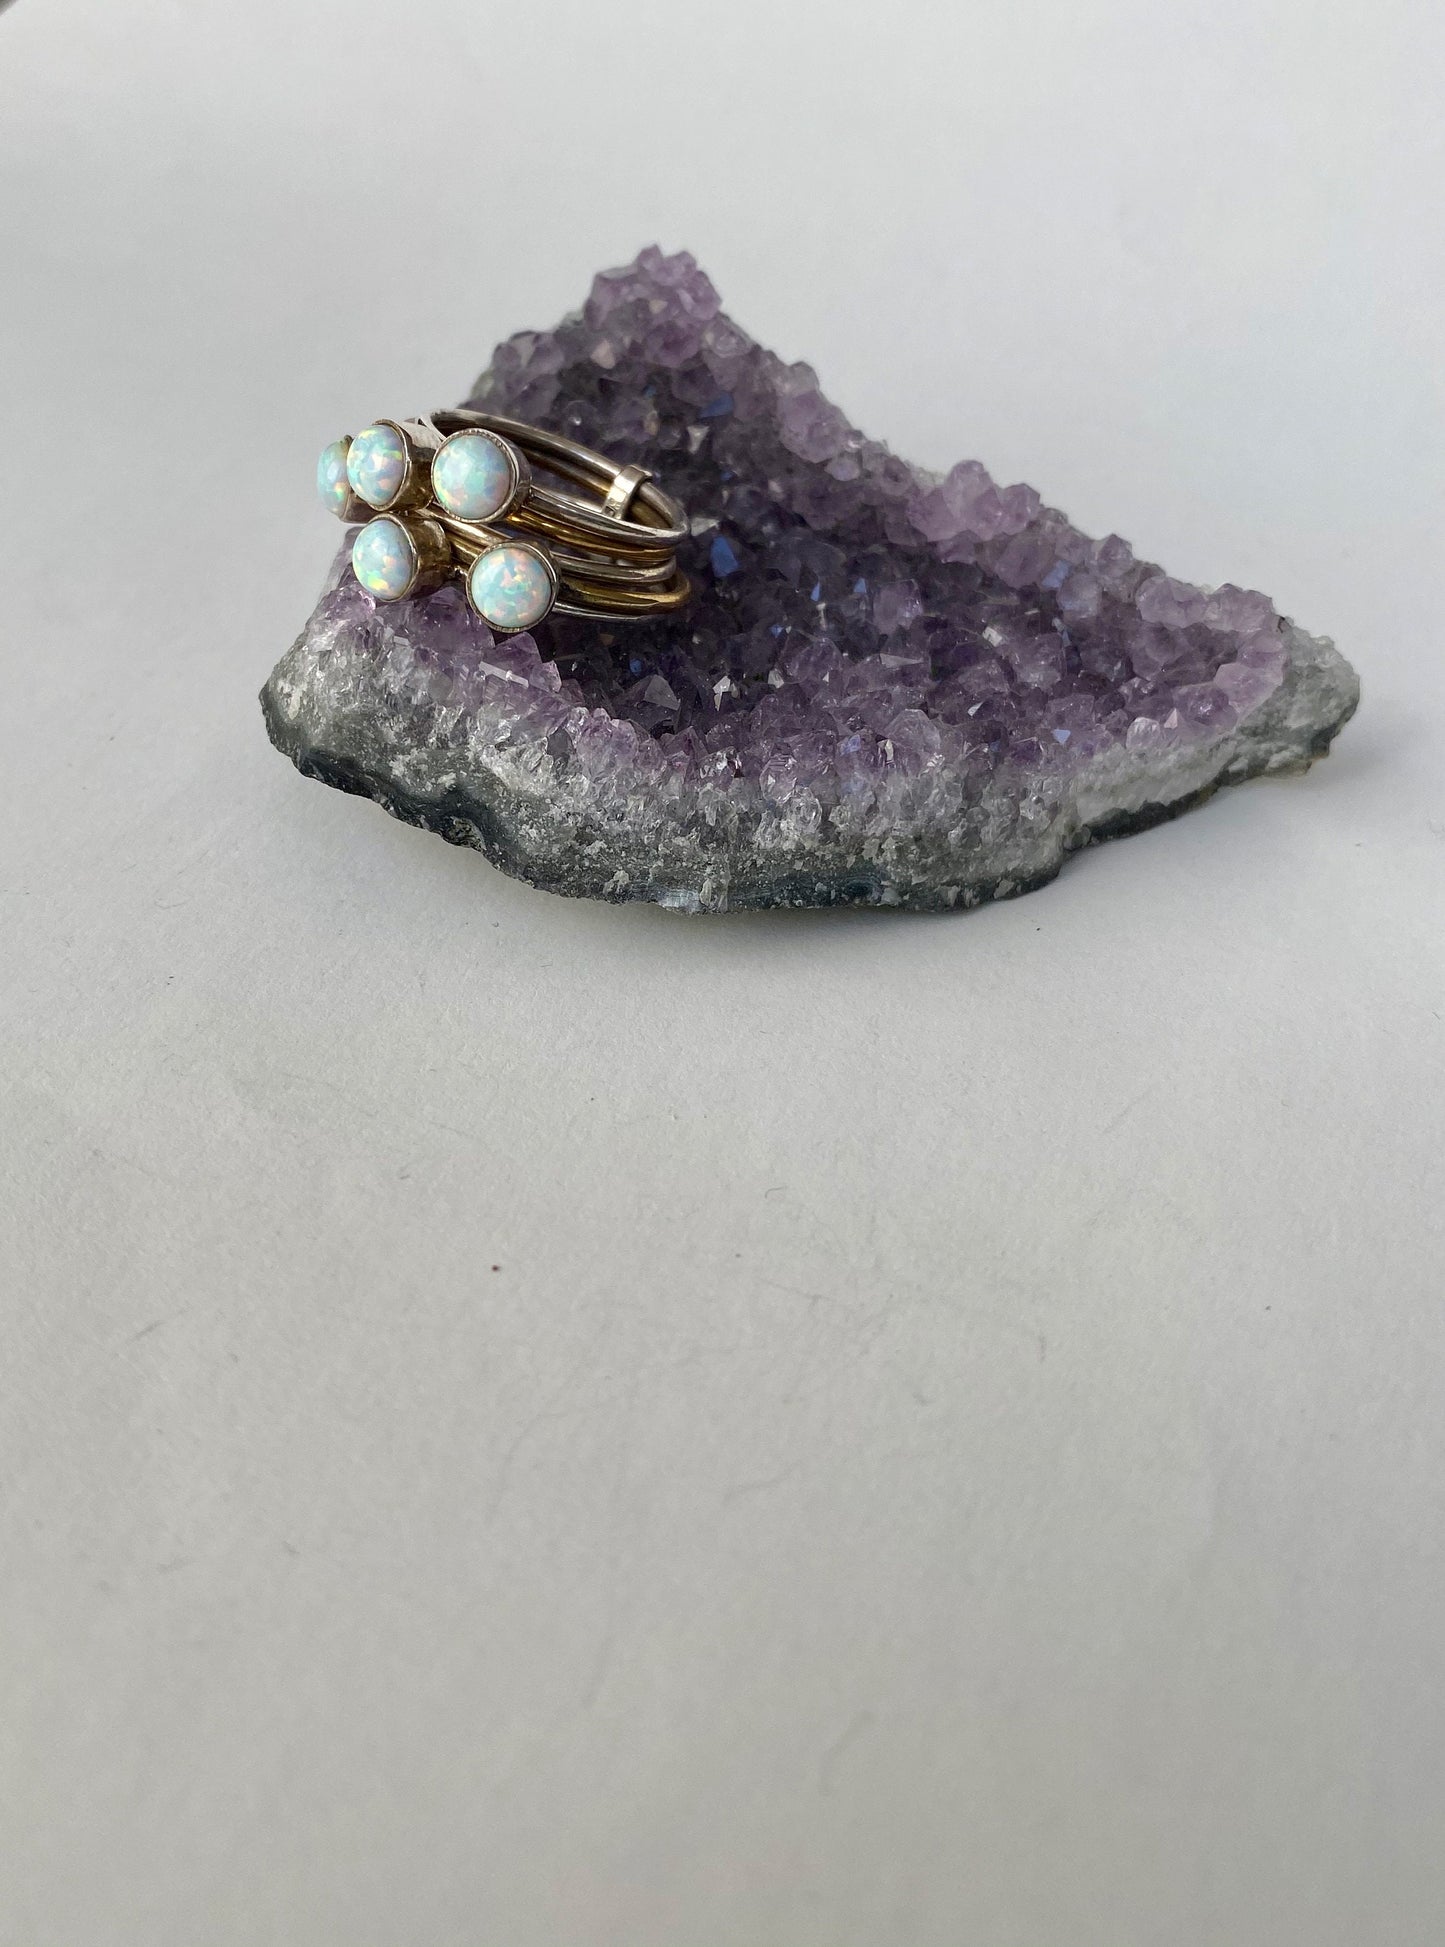 Handmade size 6.5 multi fire opal. Gold and sterling silver bands ring.